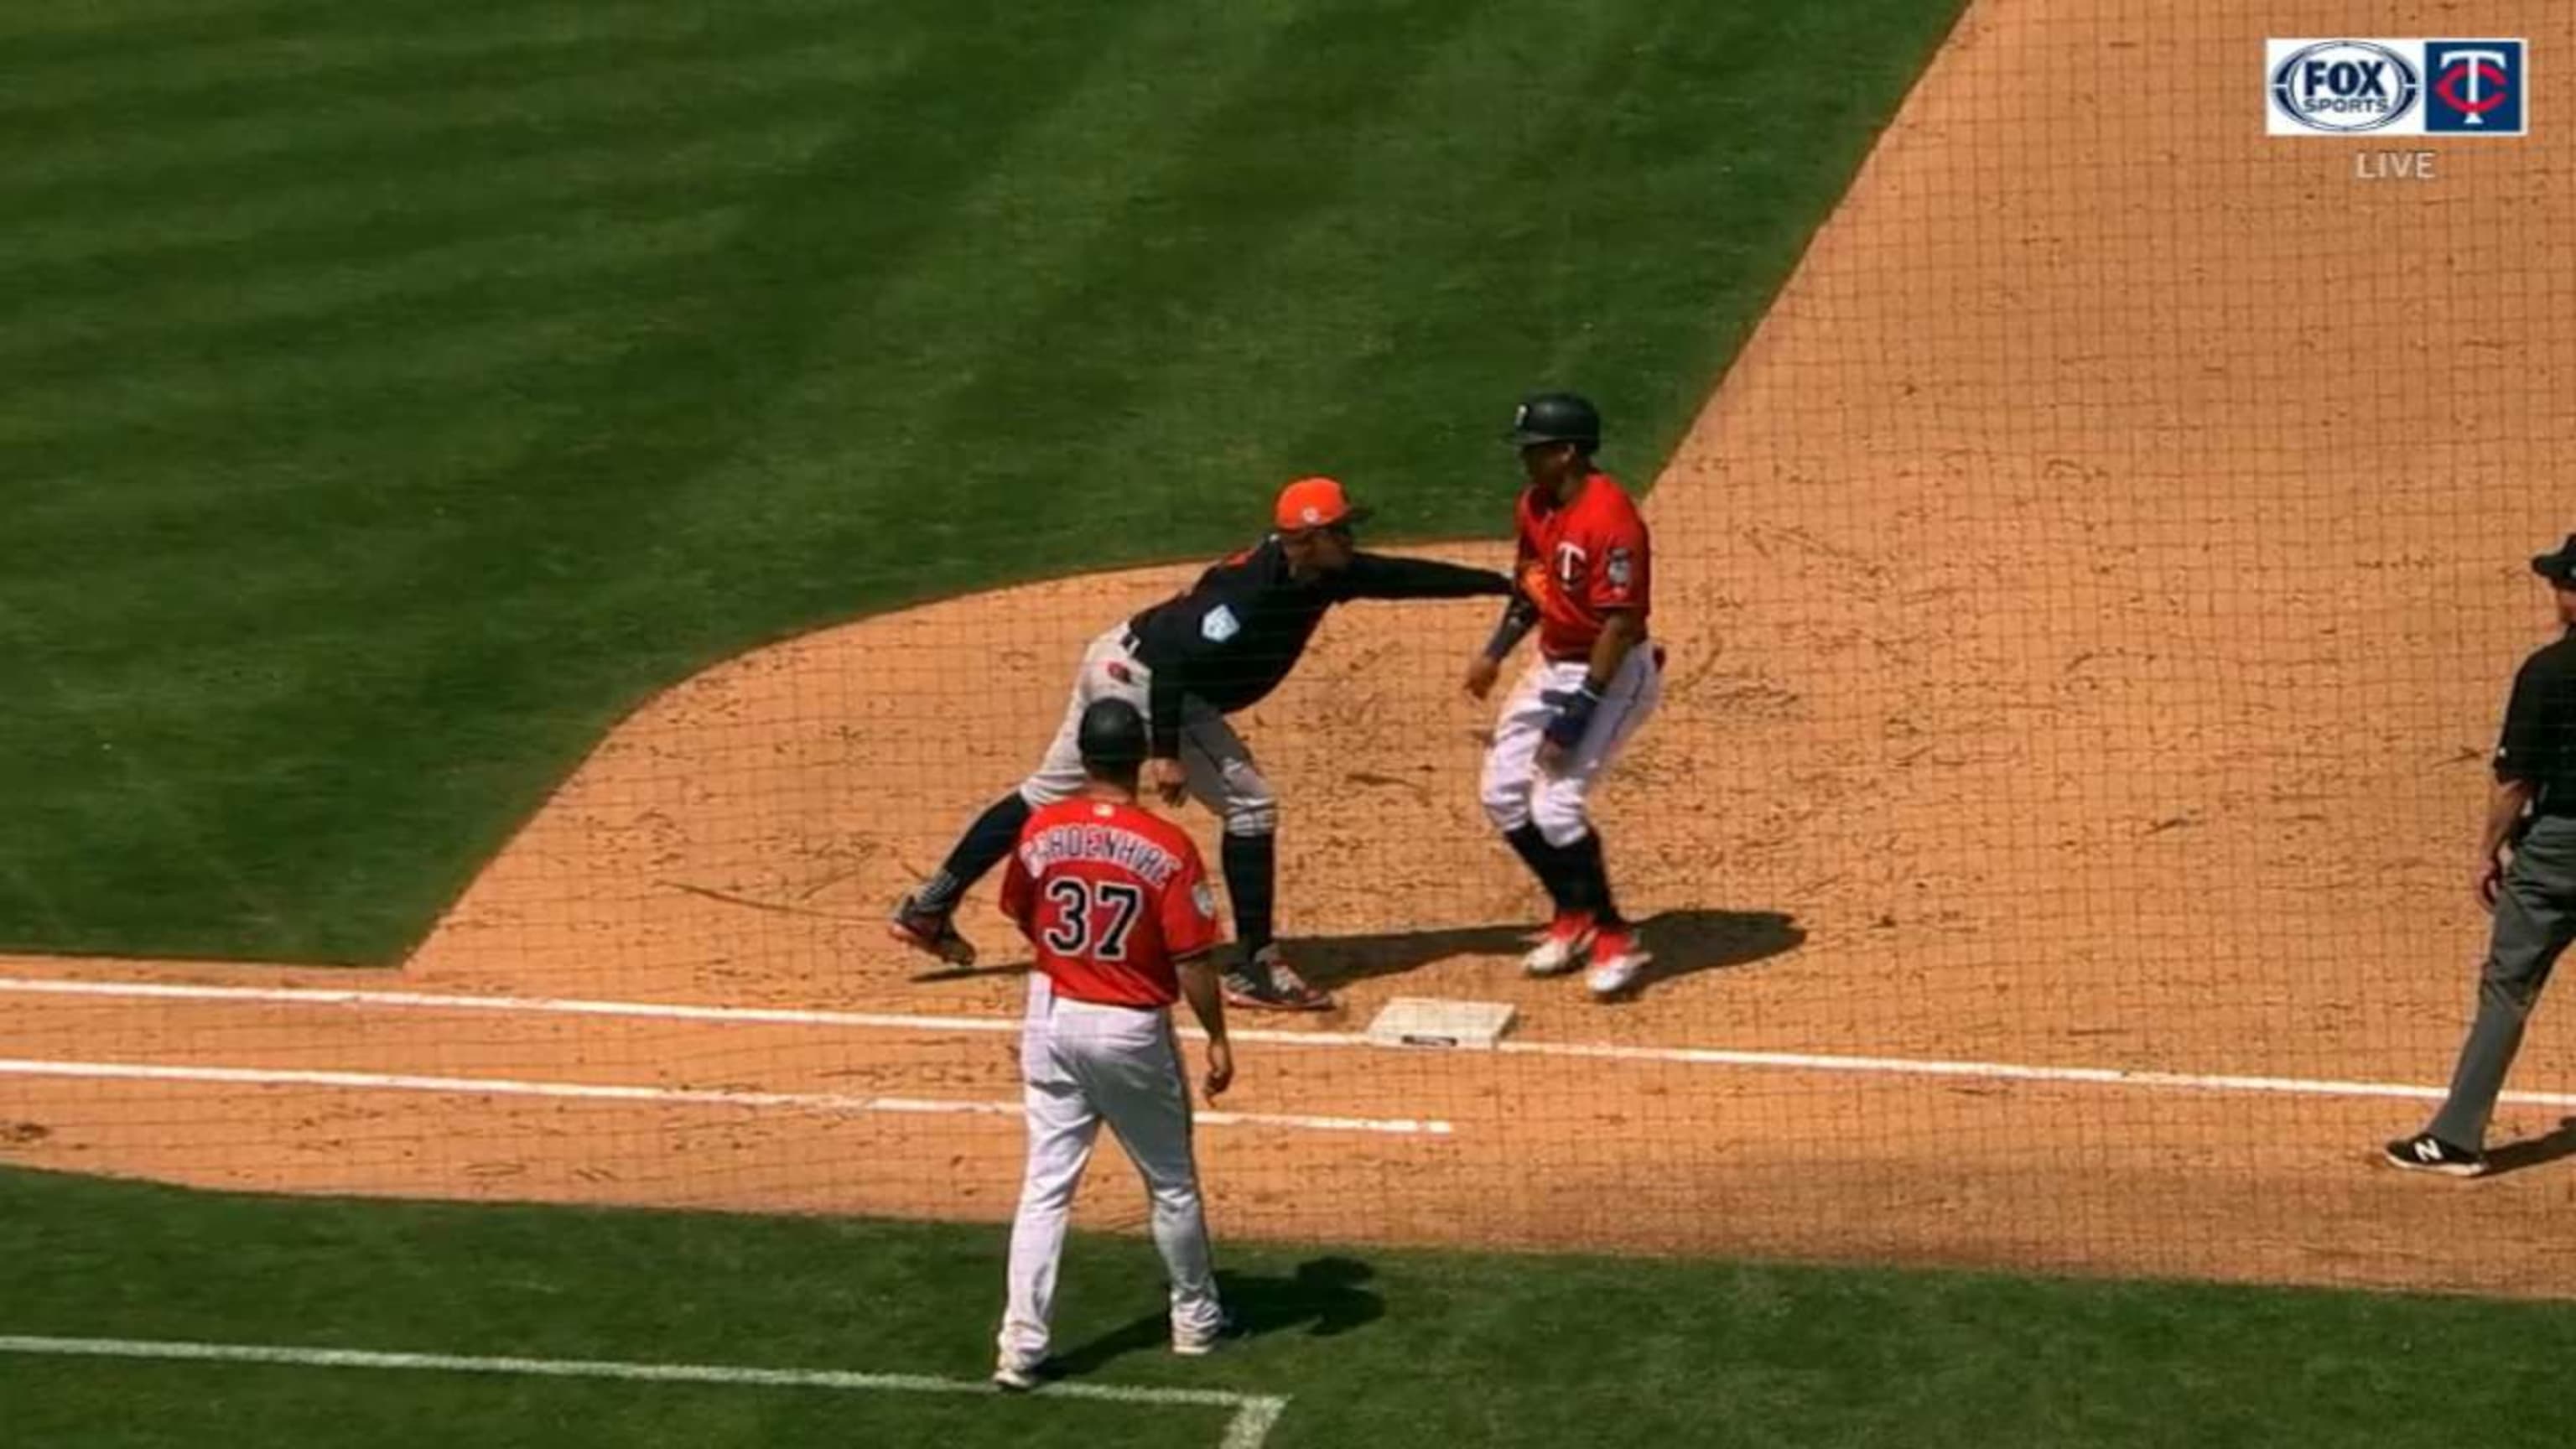 Miguel Cabrera pulled off the hidden ball trick MLB